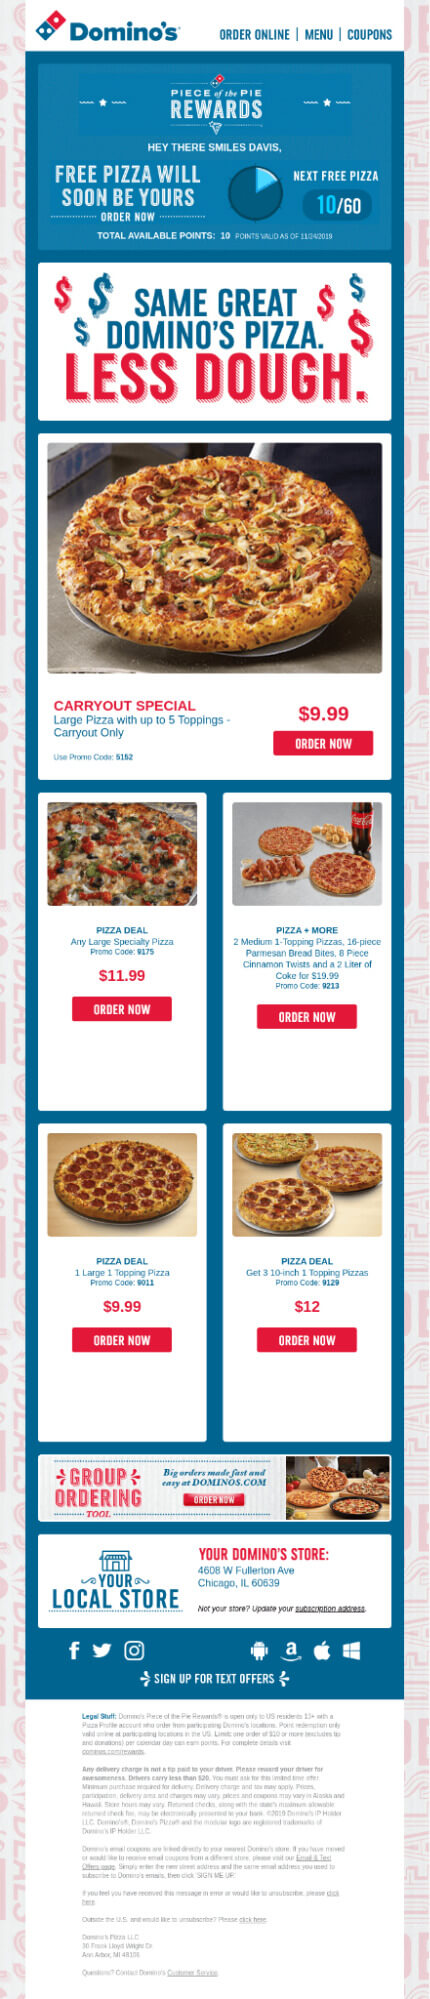 Dominos email example